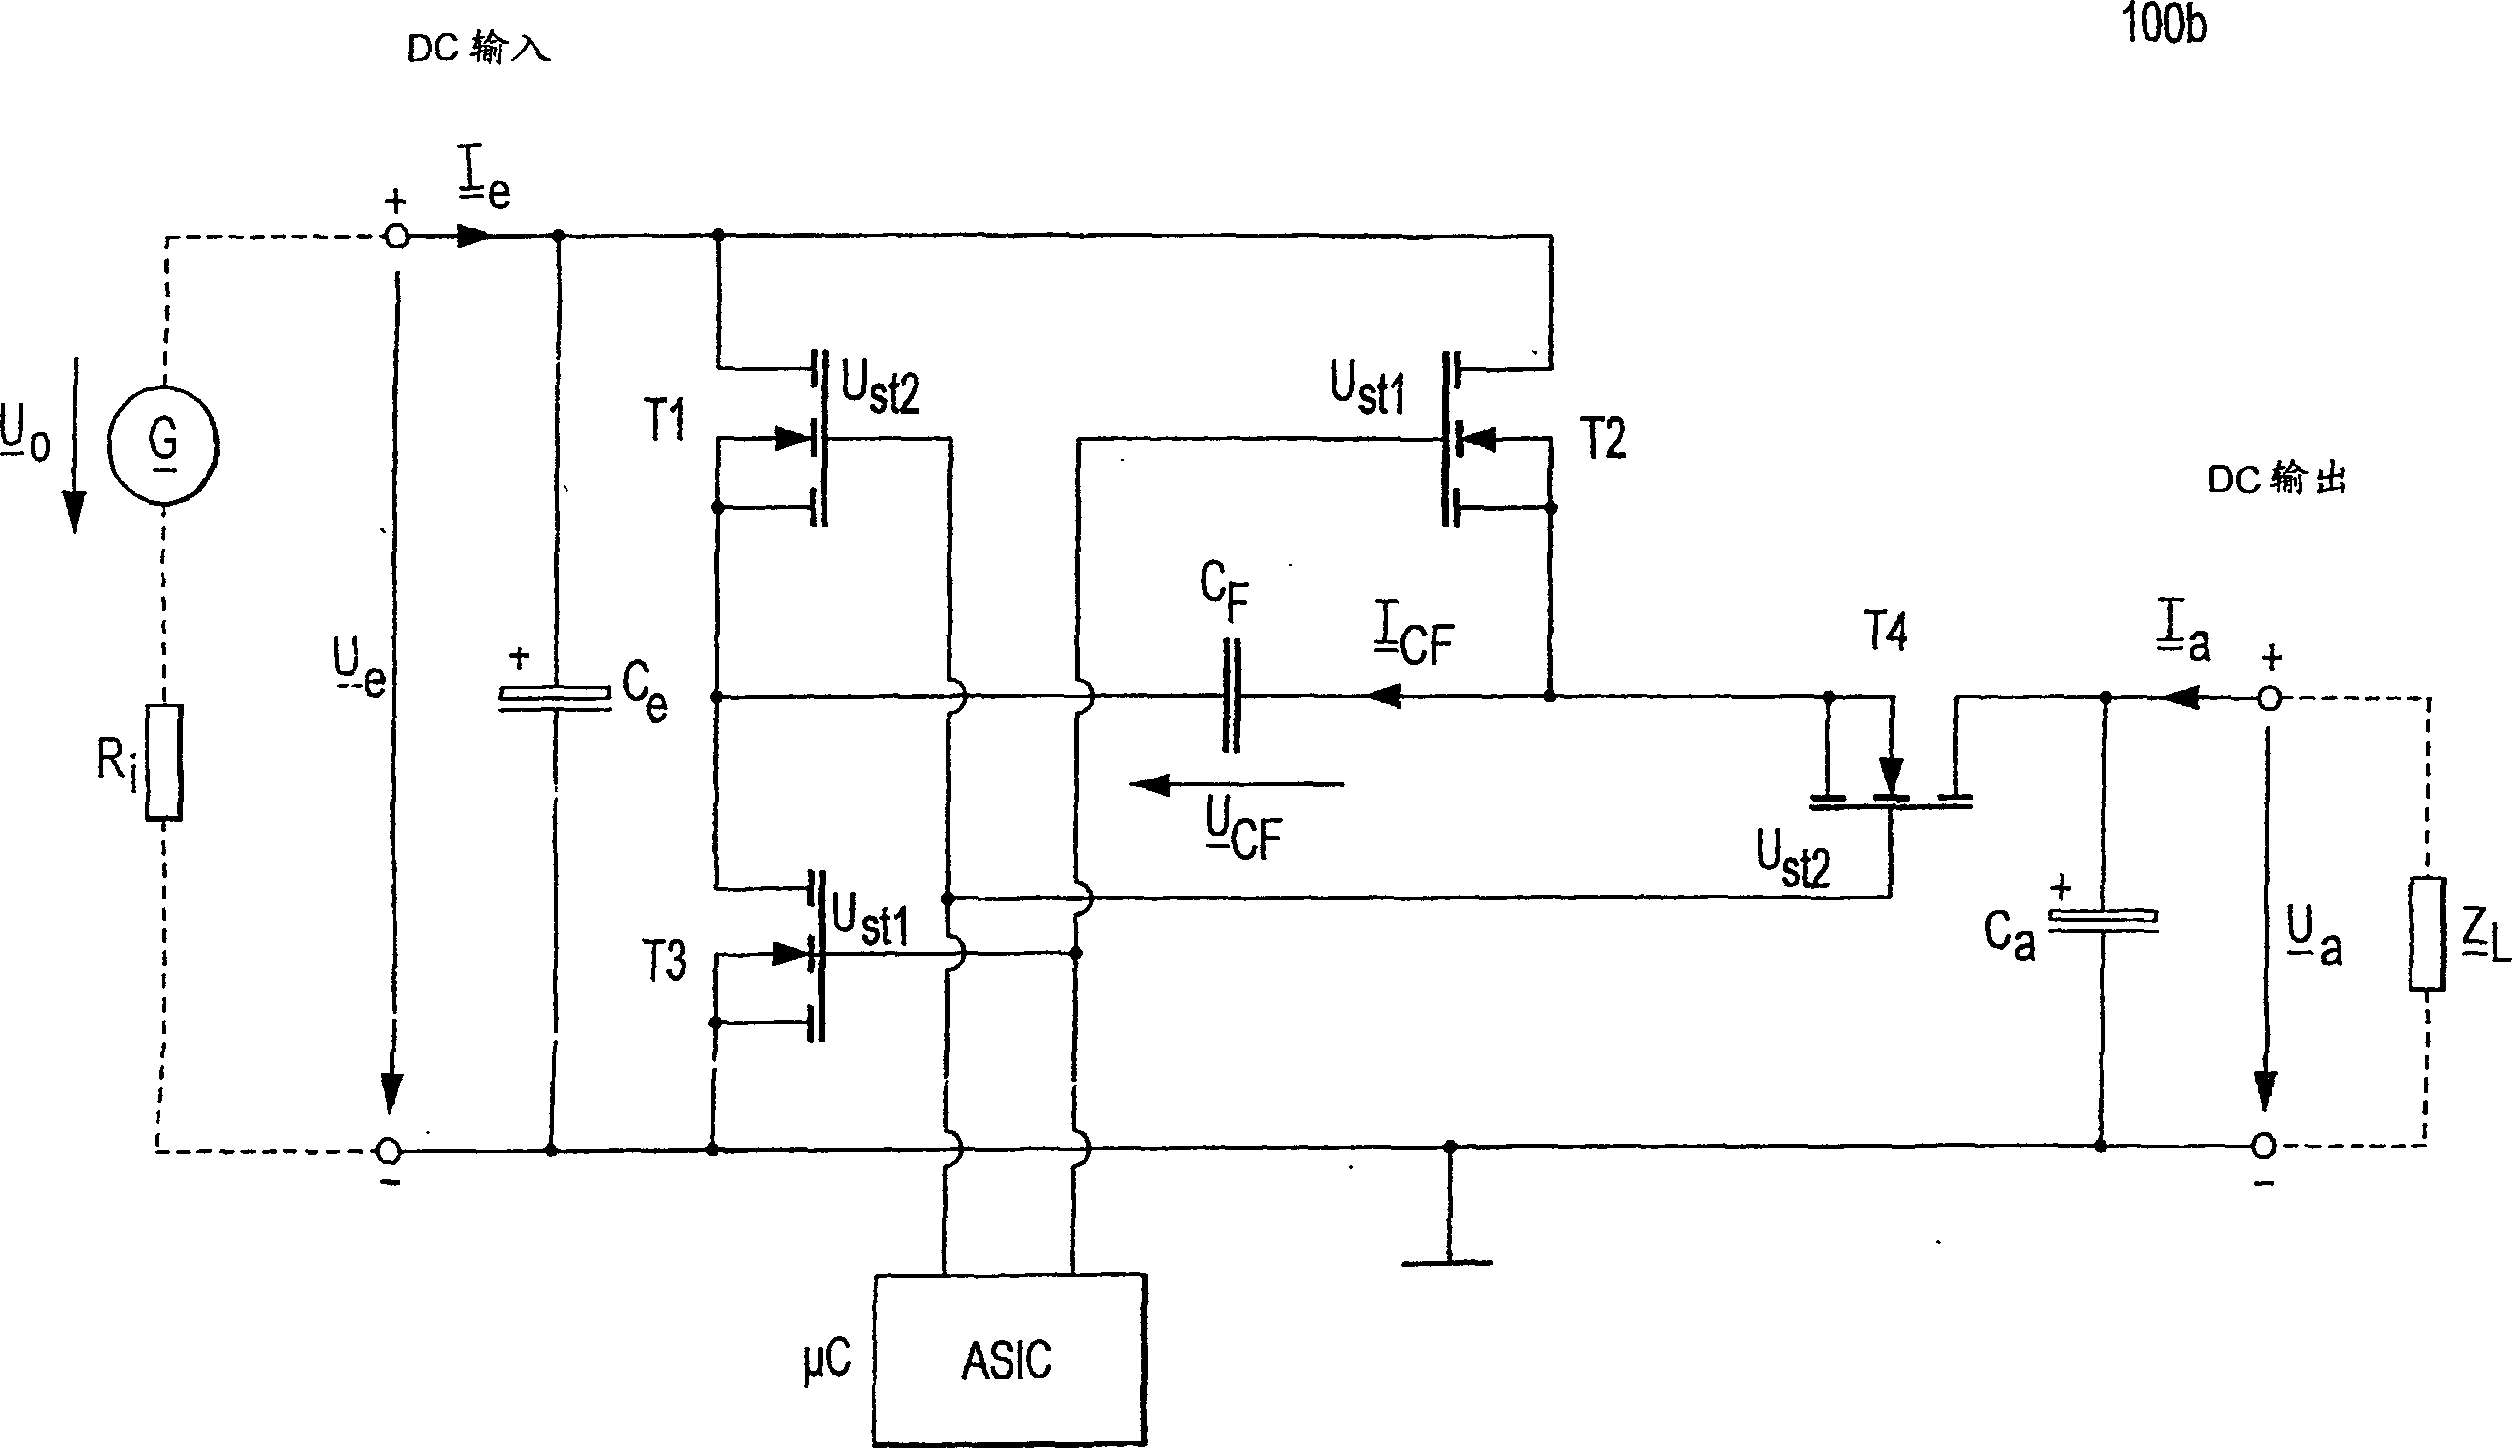 Electronic ballast with charge pump for active power factor calibration